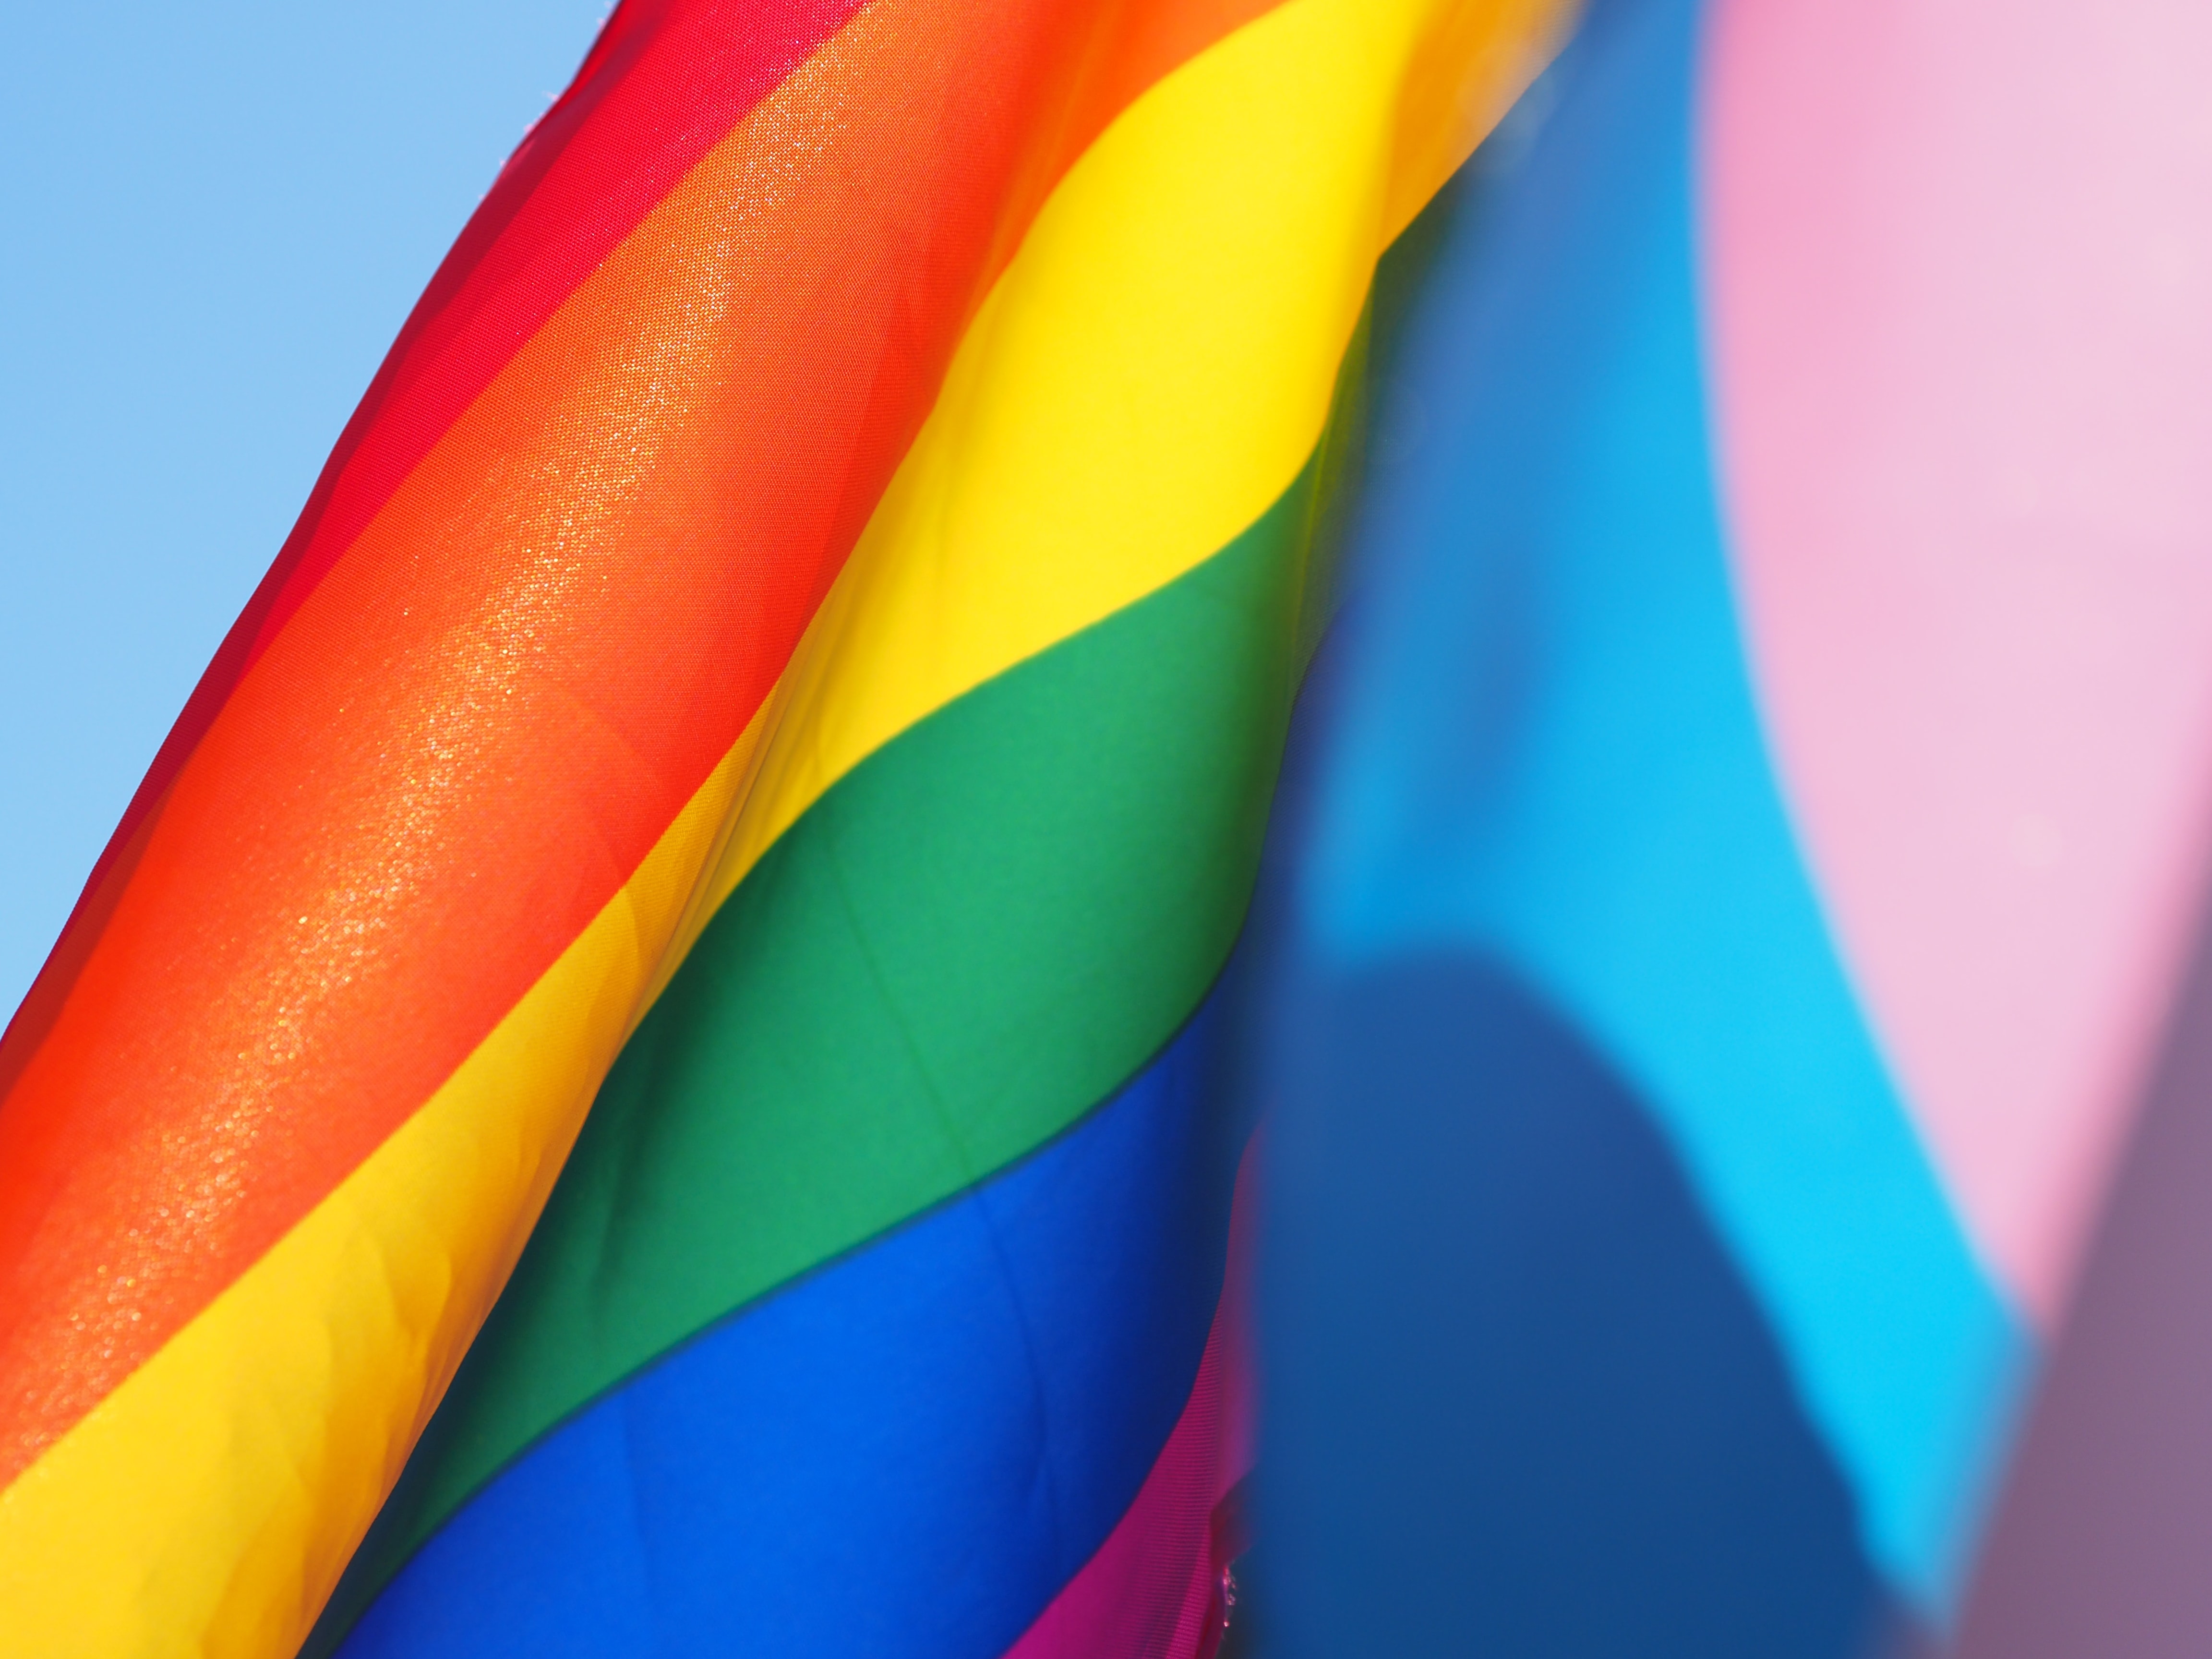 A flag with the colors of the rainbow represents LGBTQ+ pride. Next to it is the blue and pink flag of the Trans+ community.